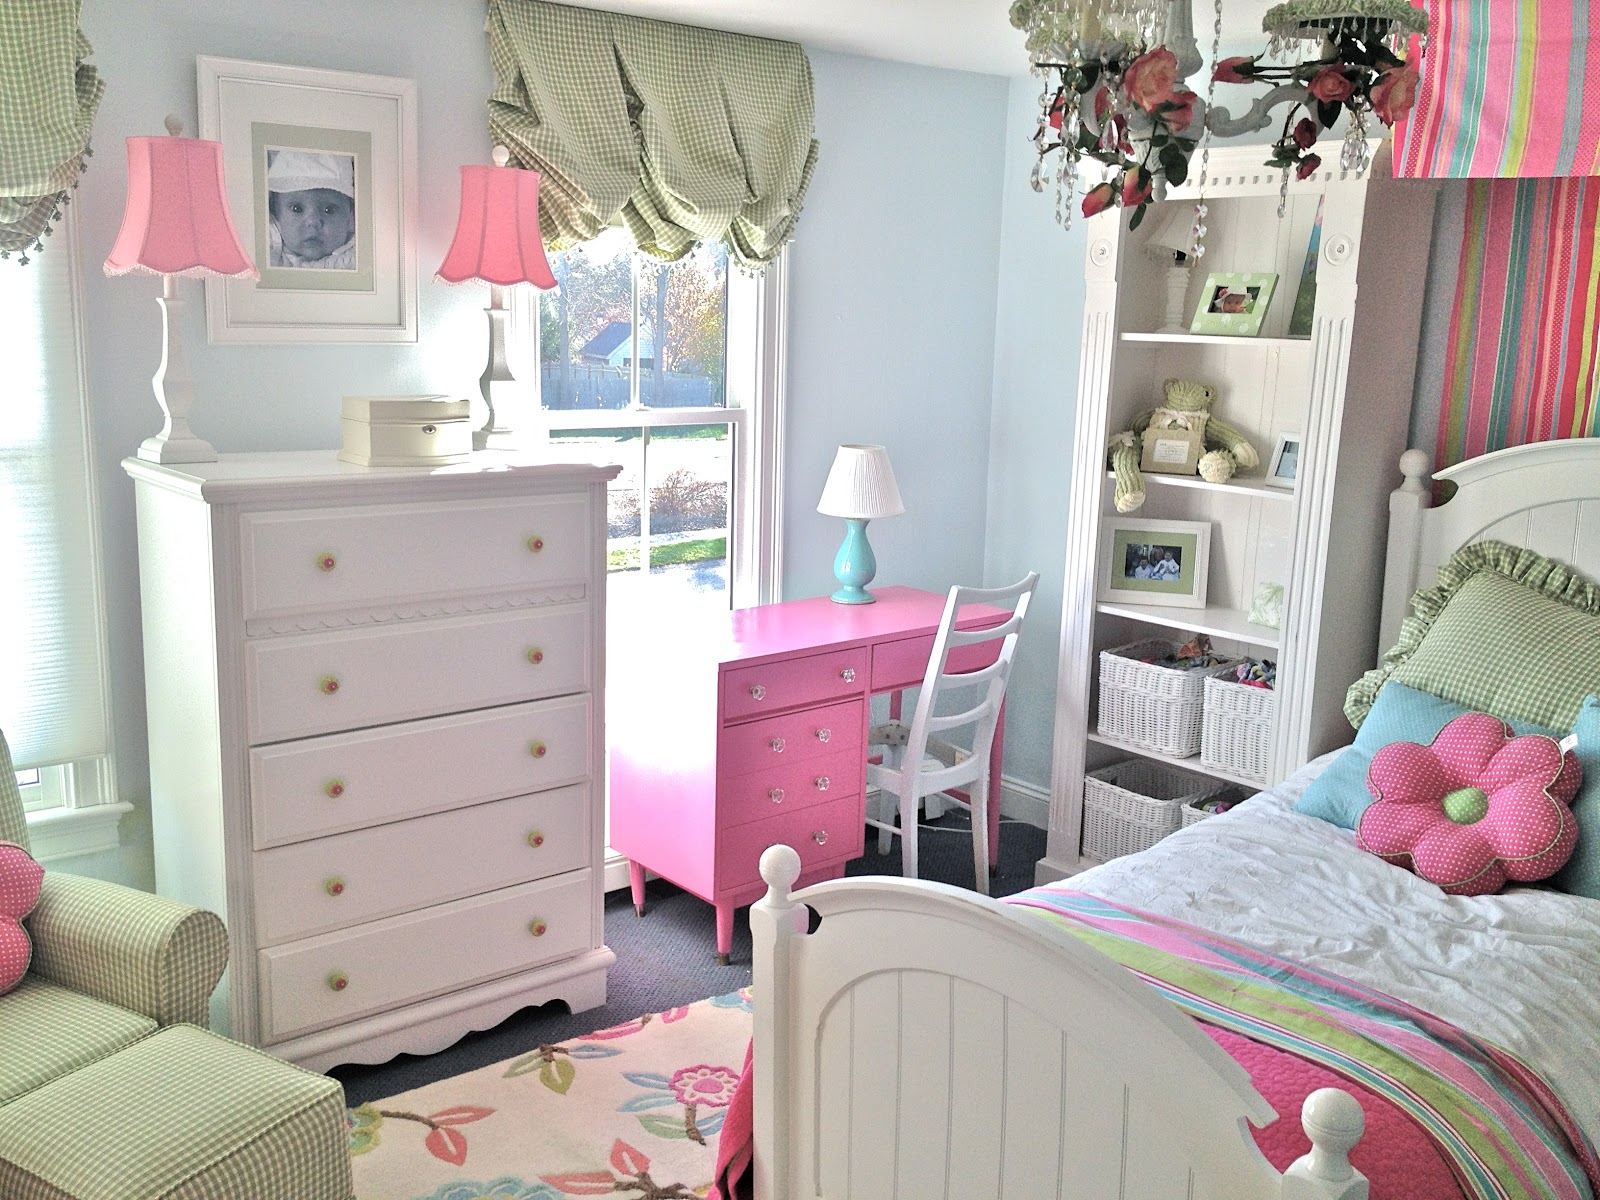 Vintage kids bedroom with a retro appeal